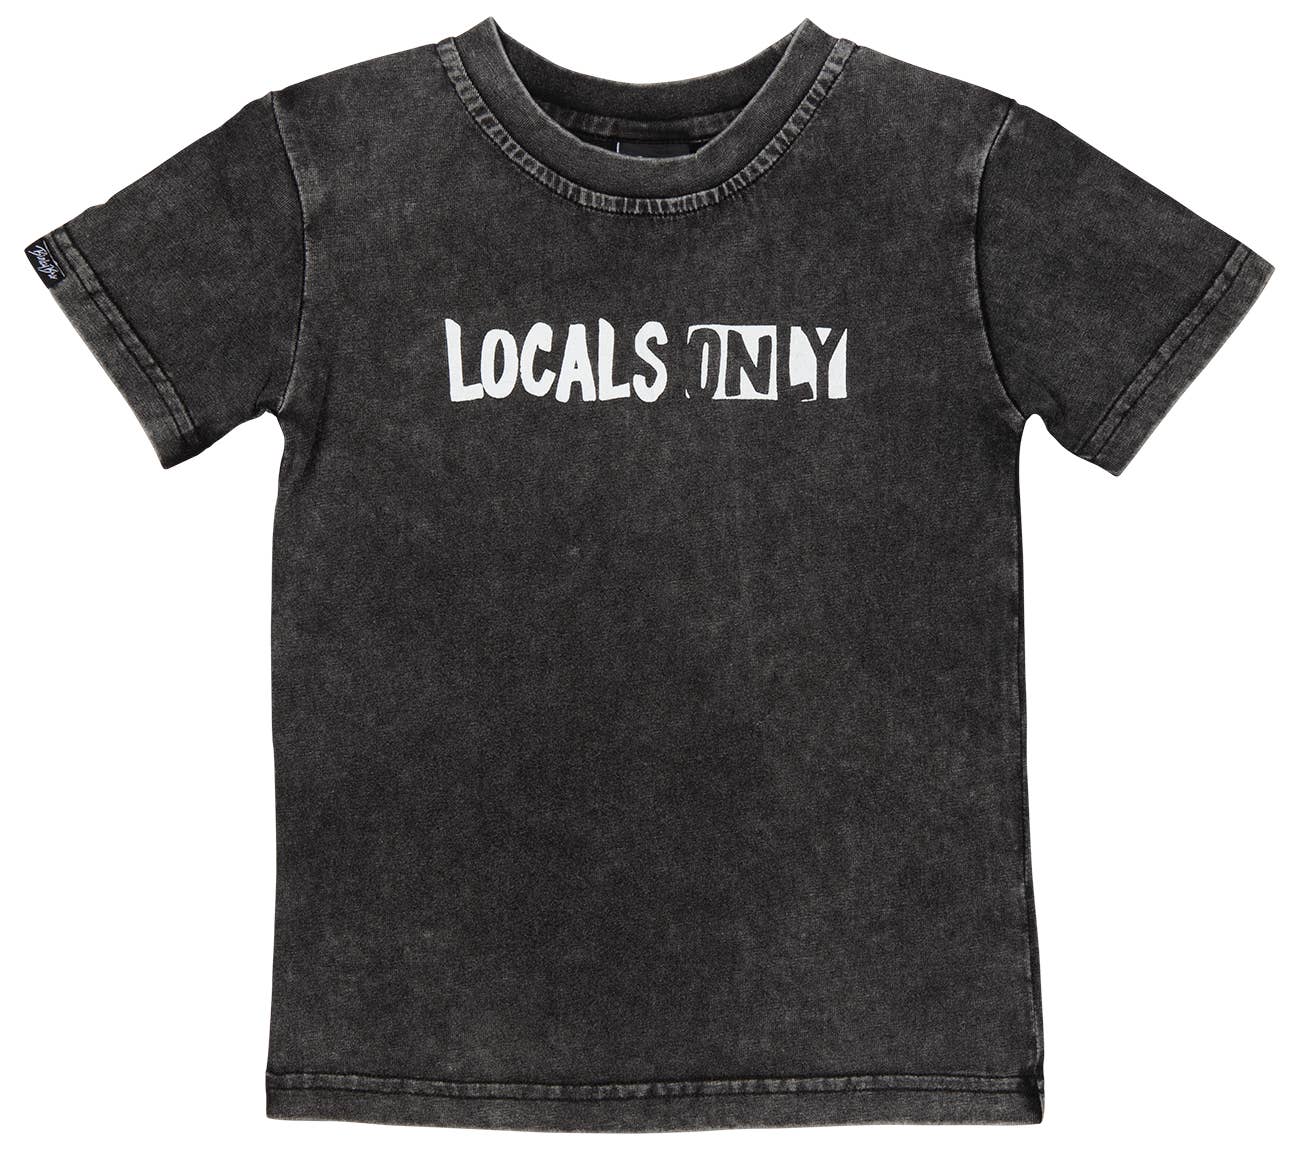 Locals Only T-Shirt - Twinkle Twinkle Little One